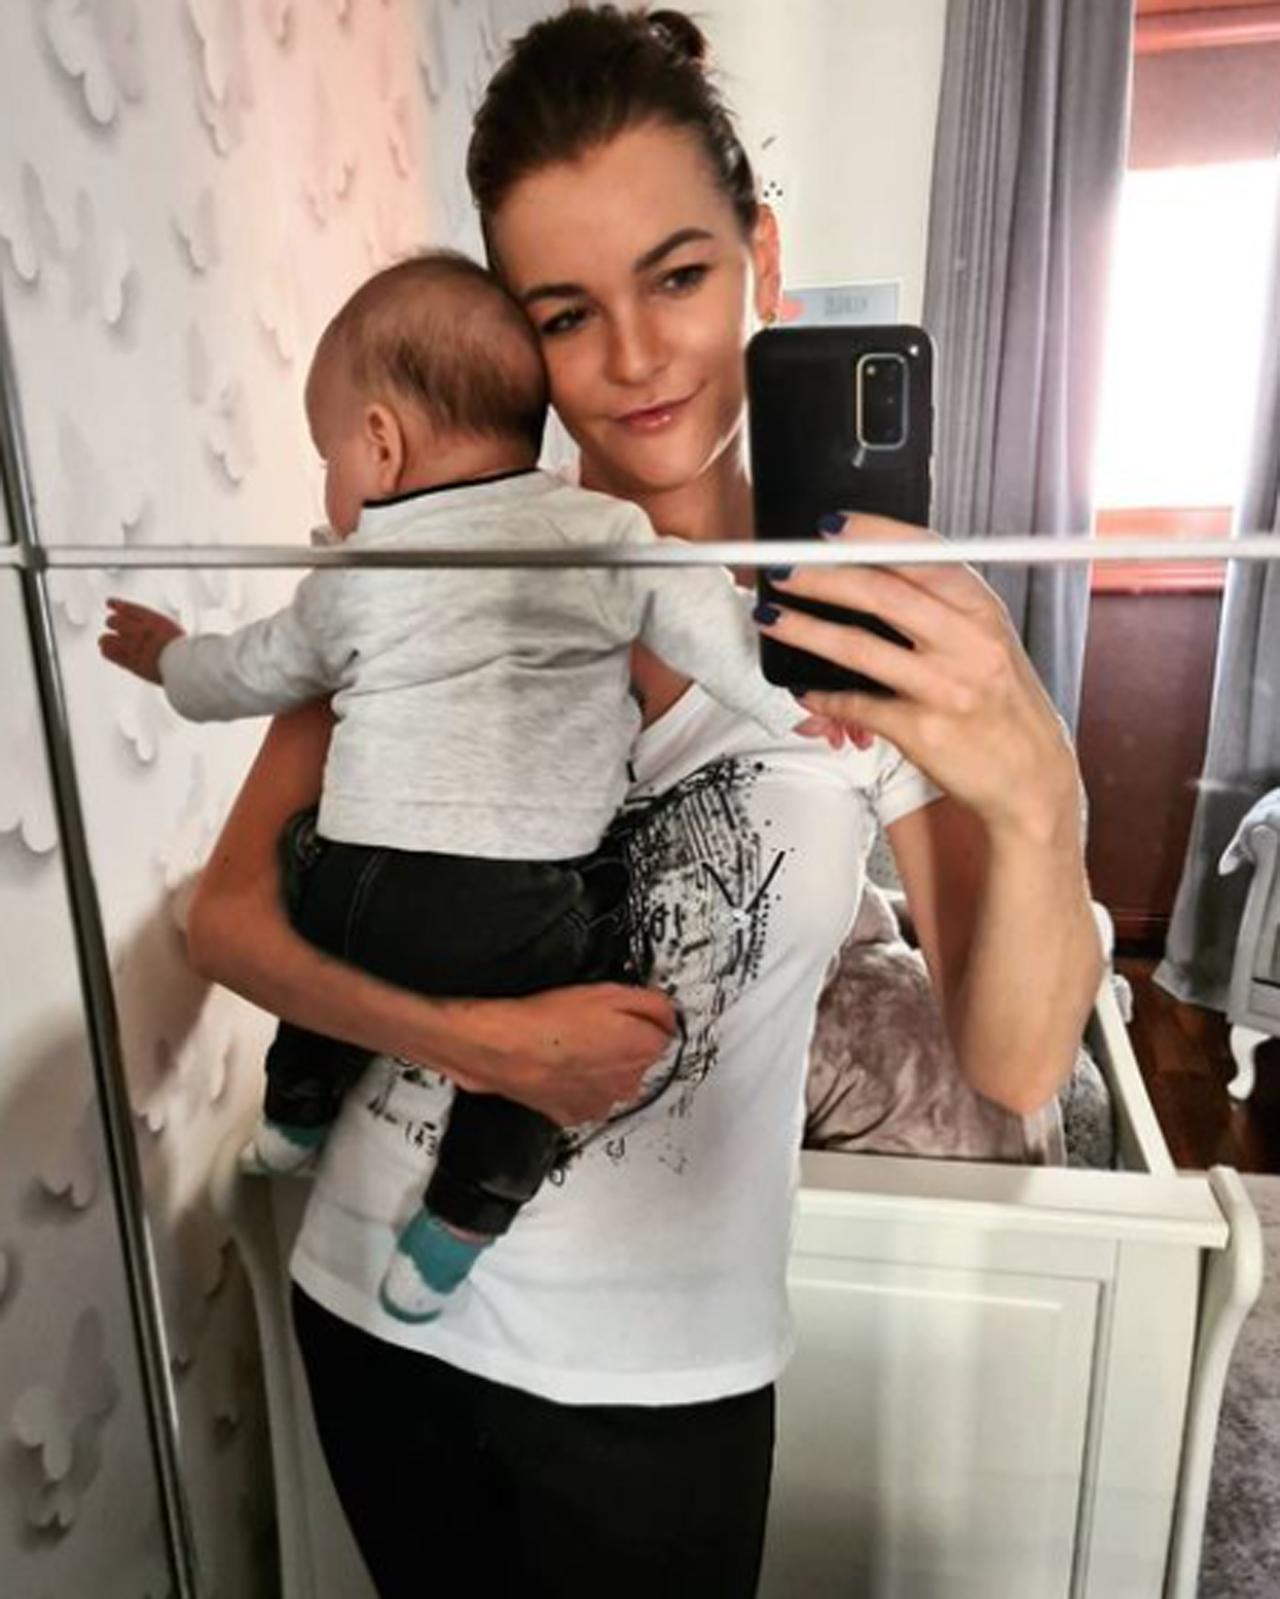 On July 27, 2020, just shortly after she celebrated her third wedding anniversary, Agnieszka Radwanska gave birth to a baby boy and named him Jakub.